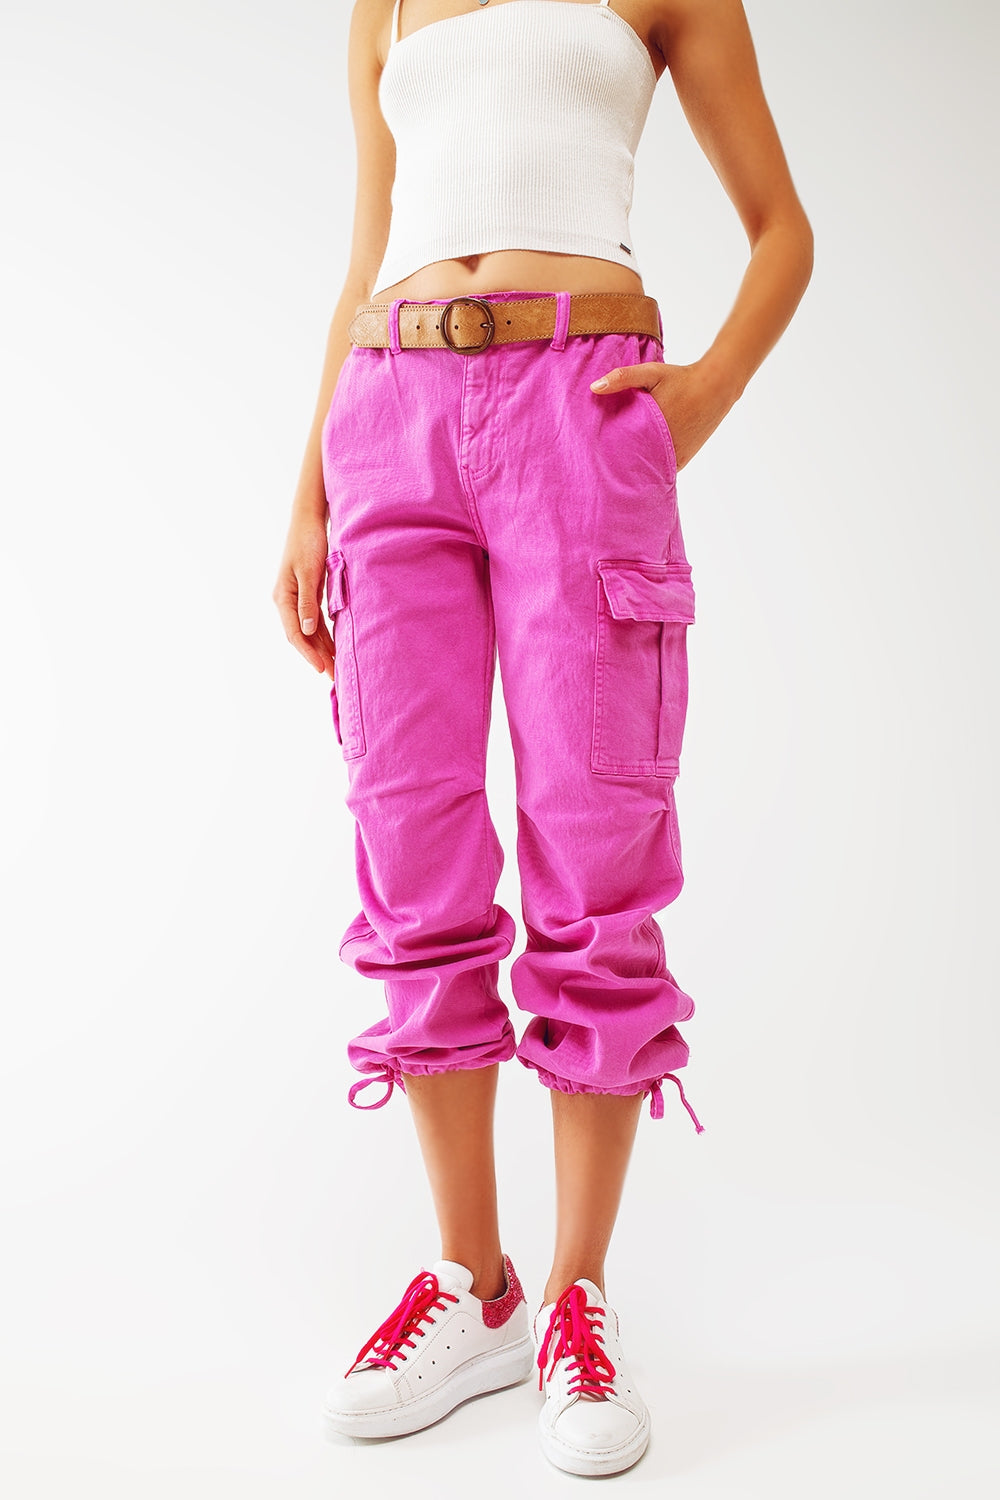 Q2 Cargo Pants with Tassel ends in Fuchsia